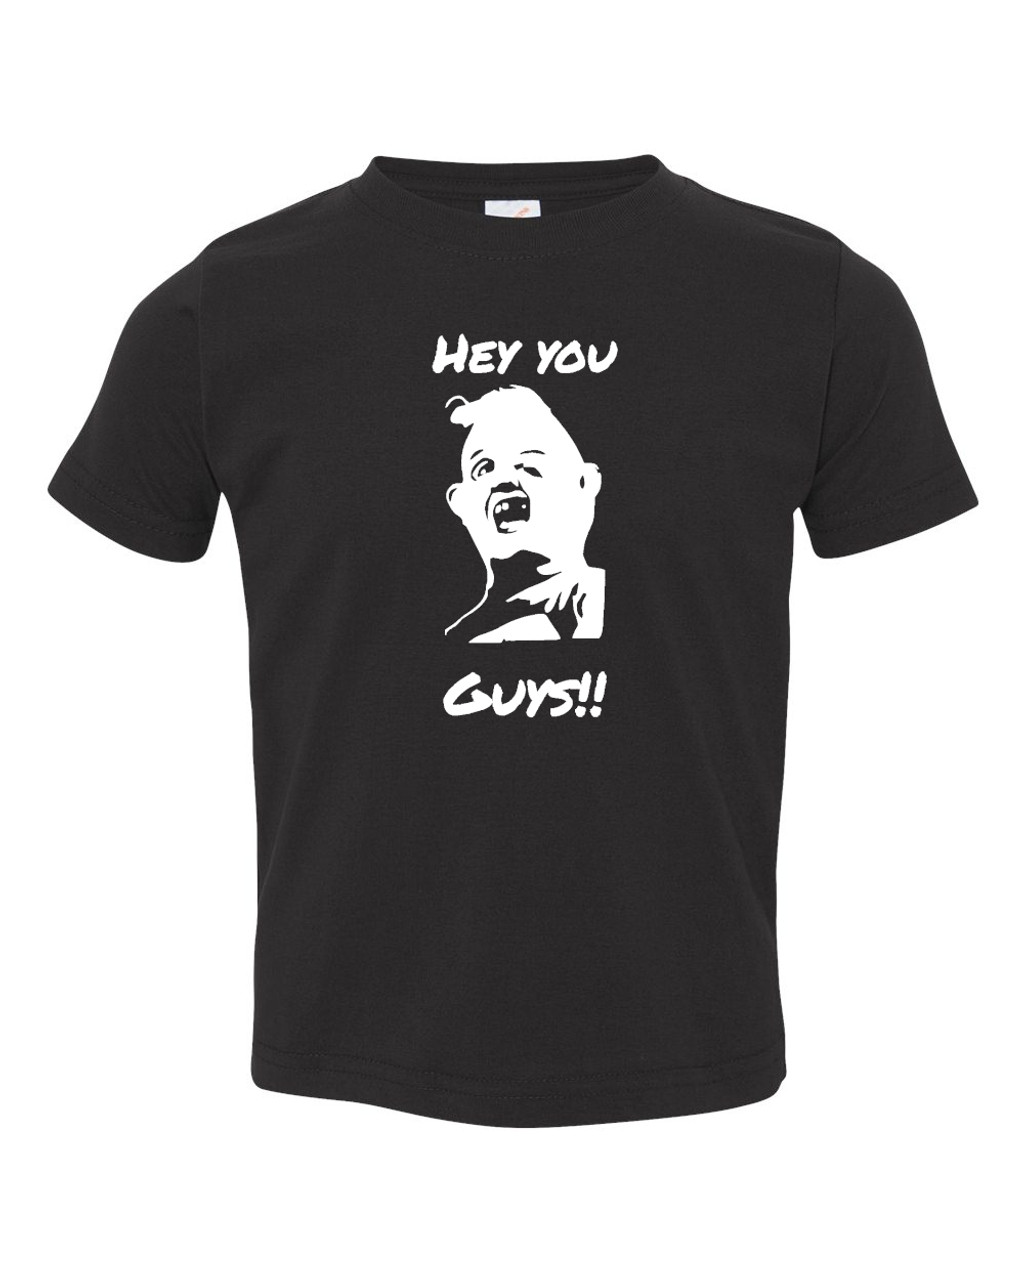 Sloth Goonies Hey You Guys Cotton Baby Infant & Toddler Black T-Shirt